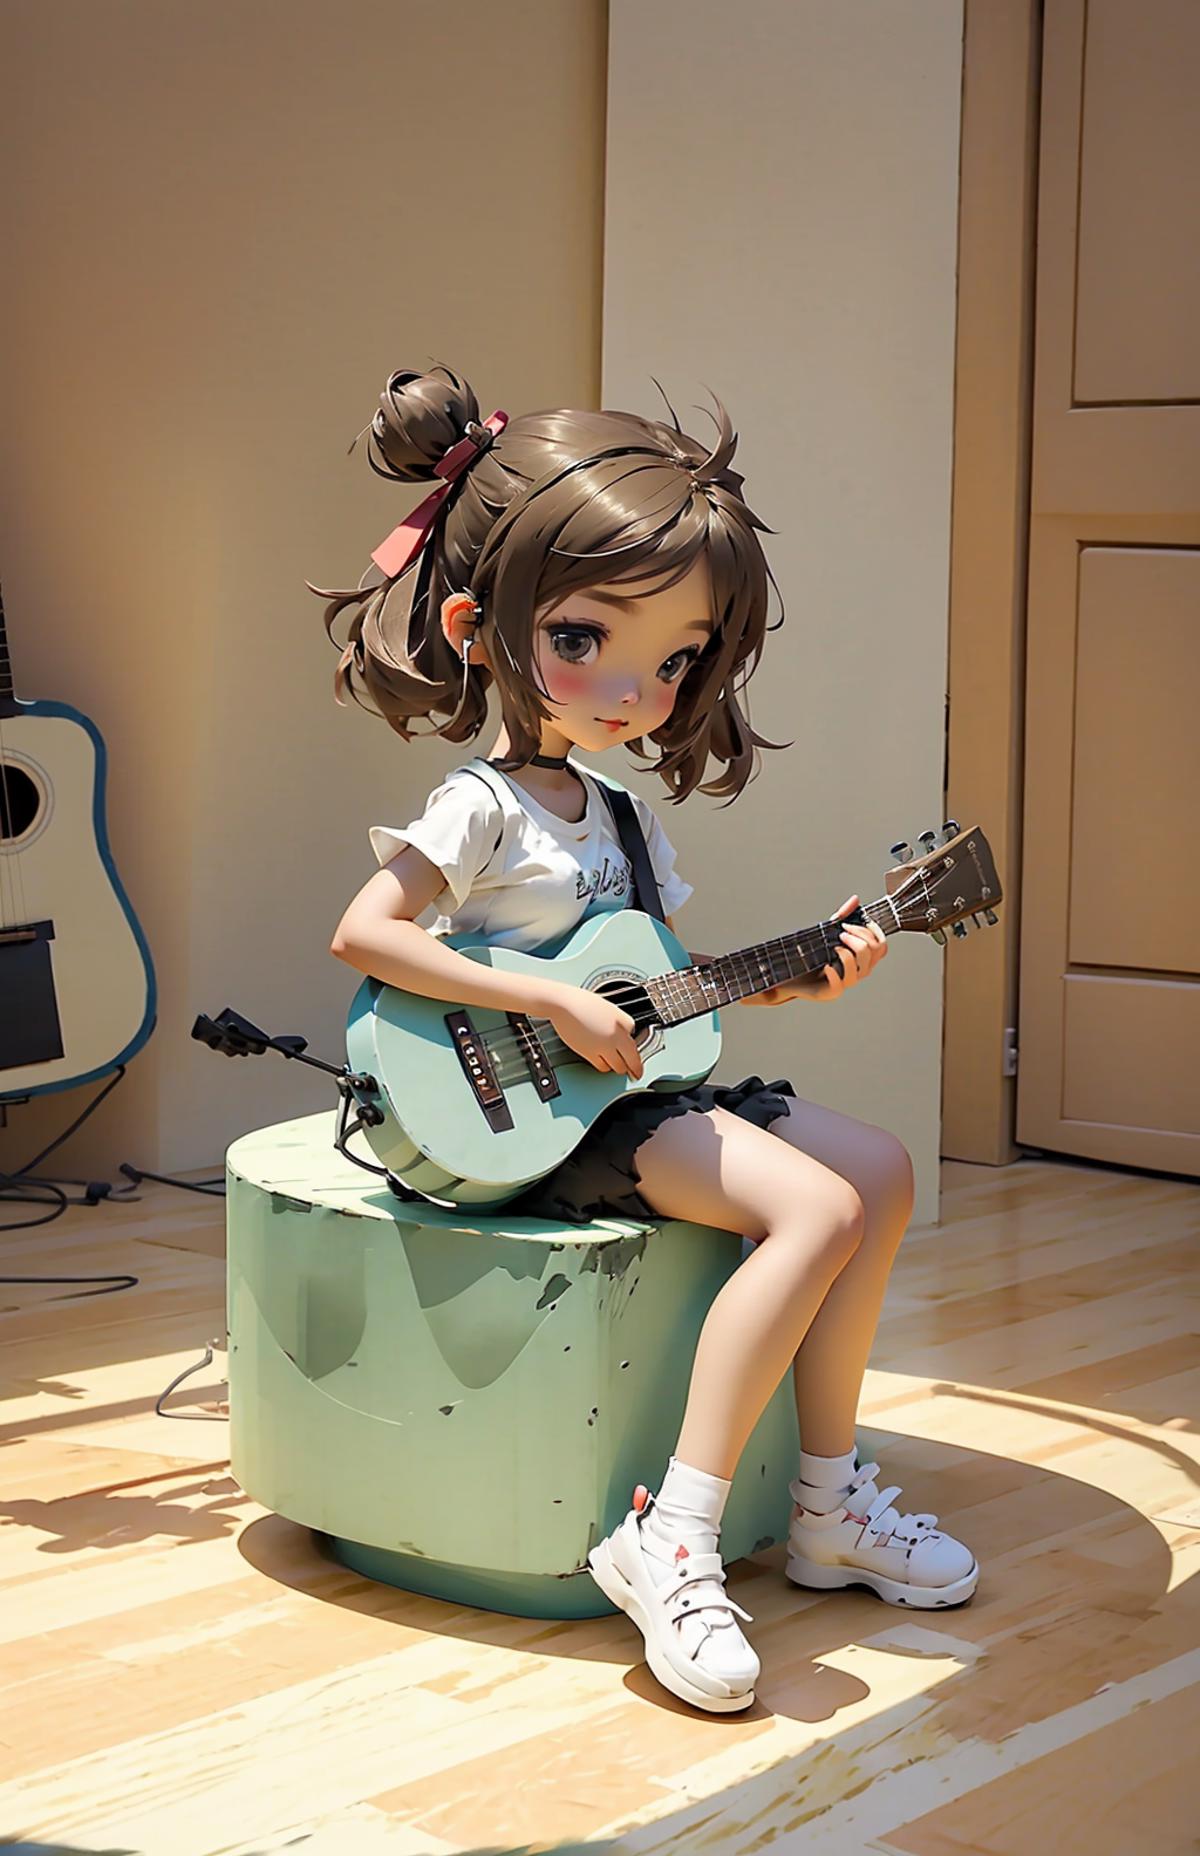 anime chibi girl with a guitar